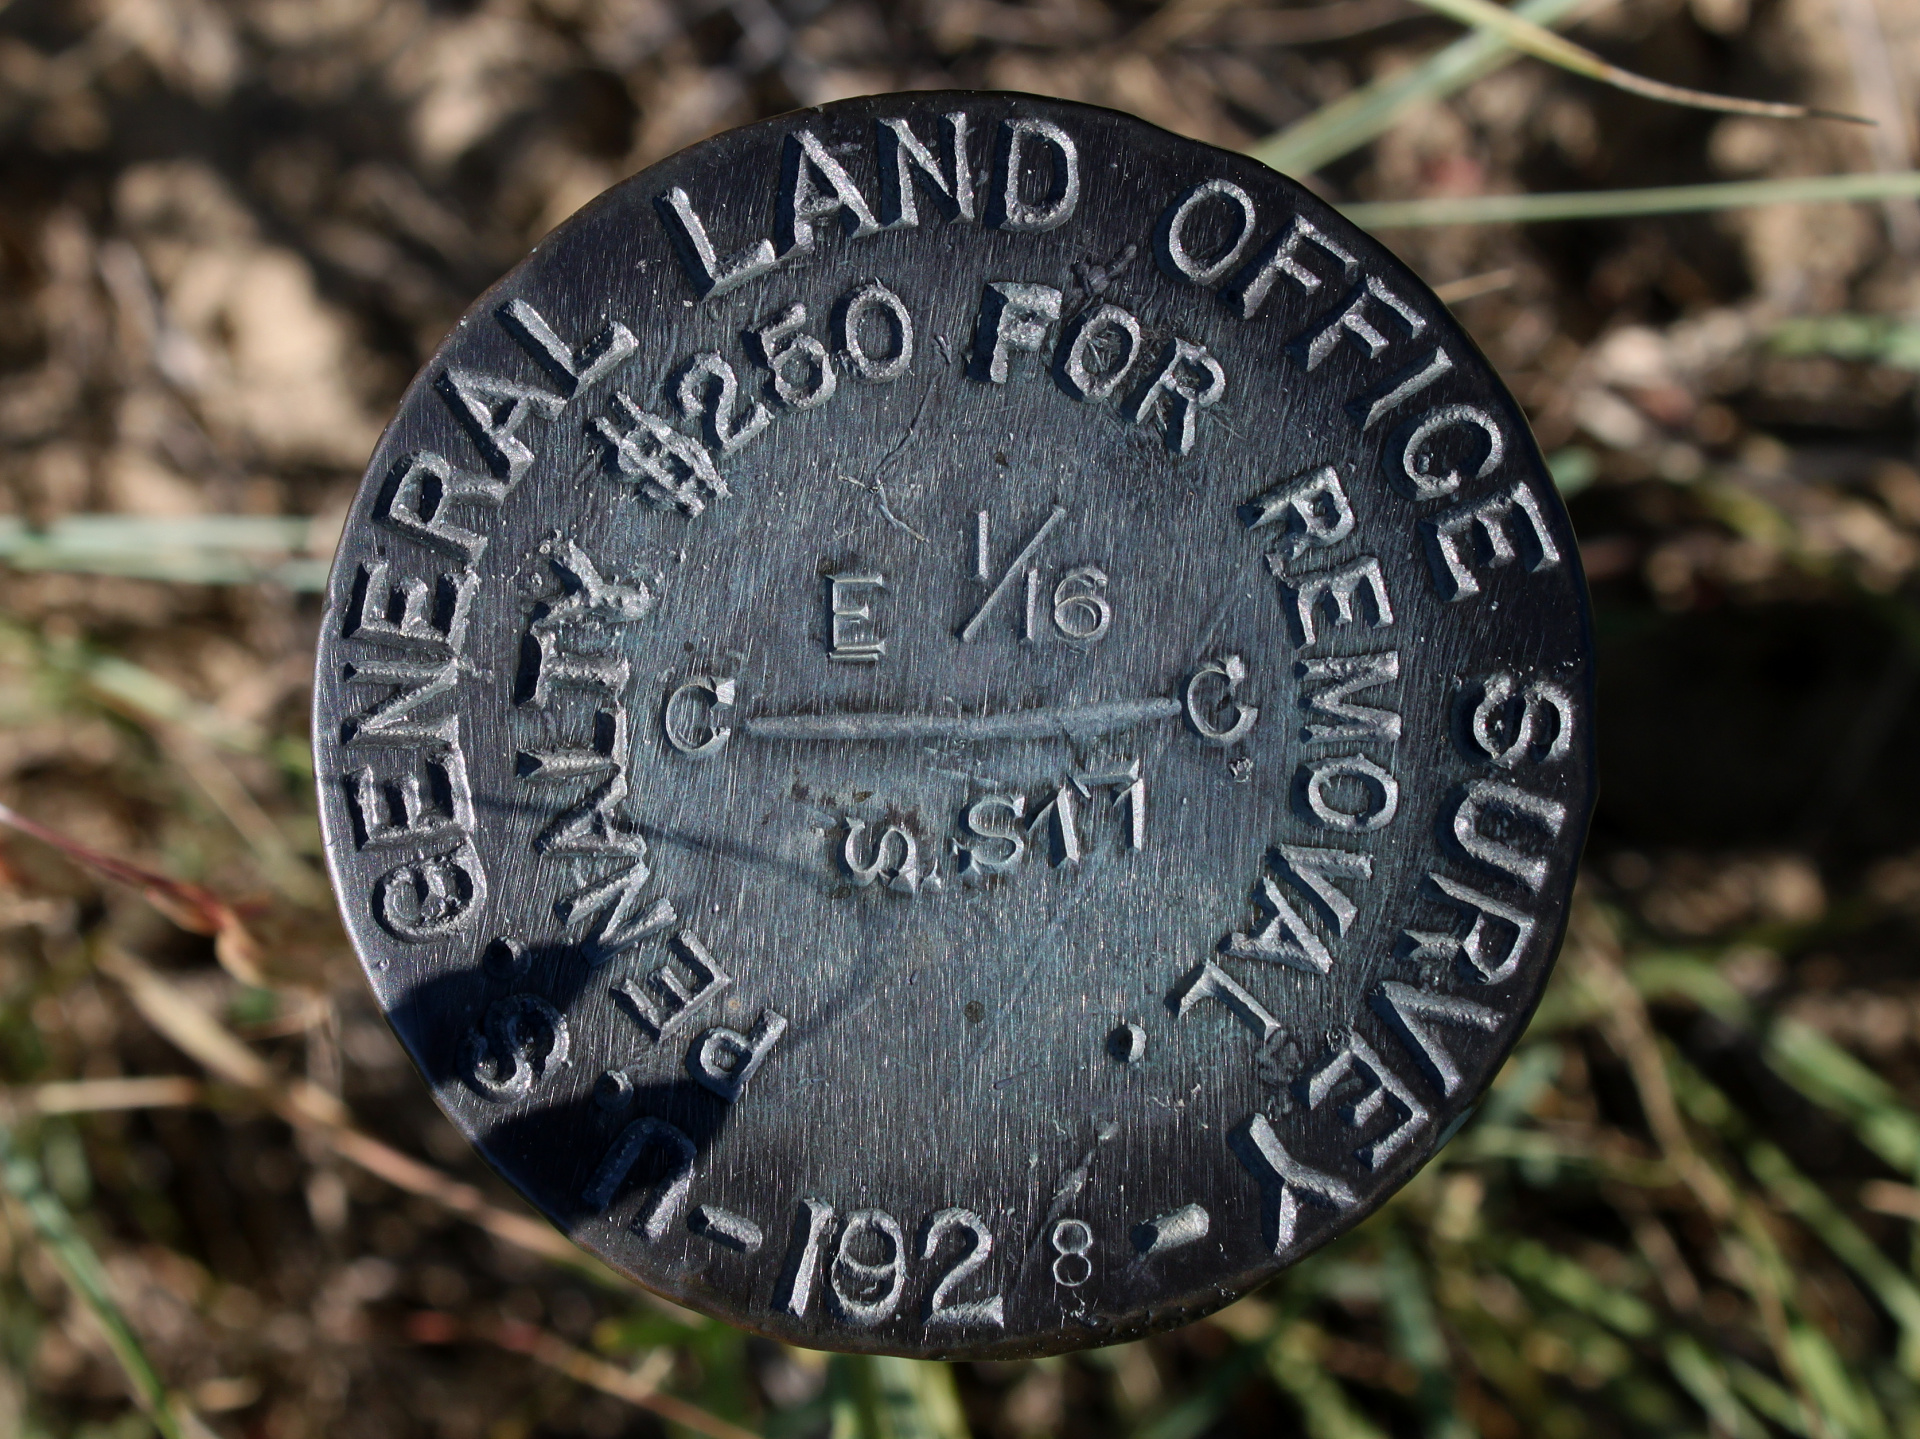 Land Marker (Travels » US Trip 3: The Roads Not Taken » The Rez » Ashland, Tongue River Valley and Birney Divide)